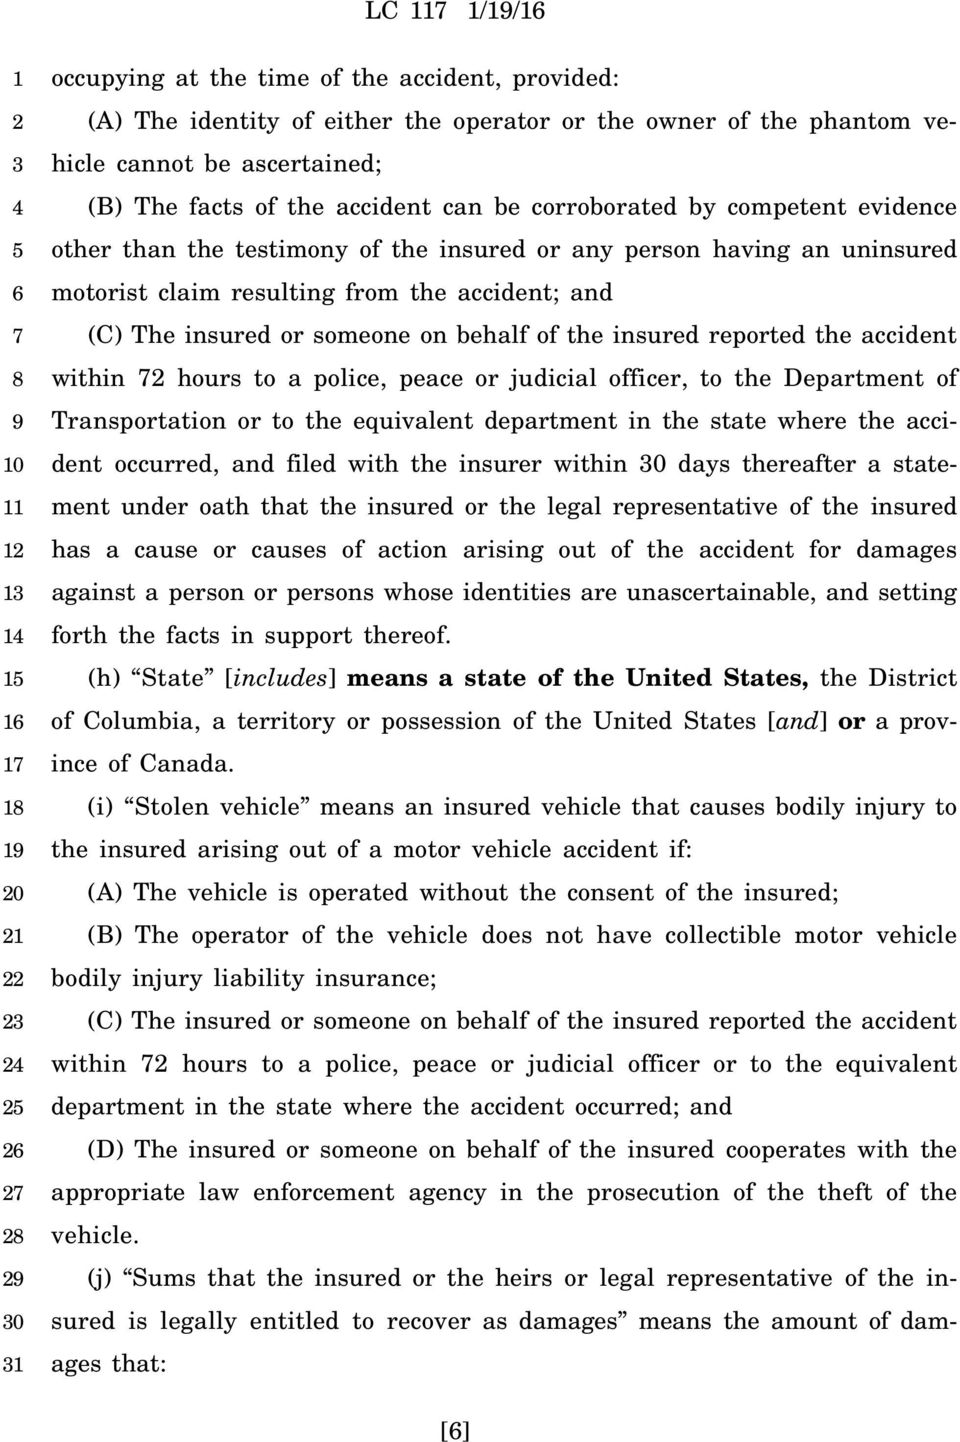 the insured reported the accident within hours to a police, peace or judicial officer, to the Department of Transportation or to the equivalent department in the state where the accident occurred,